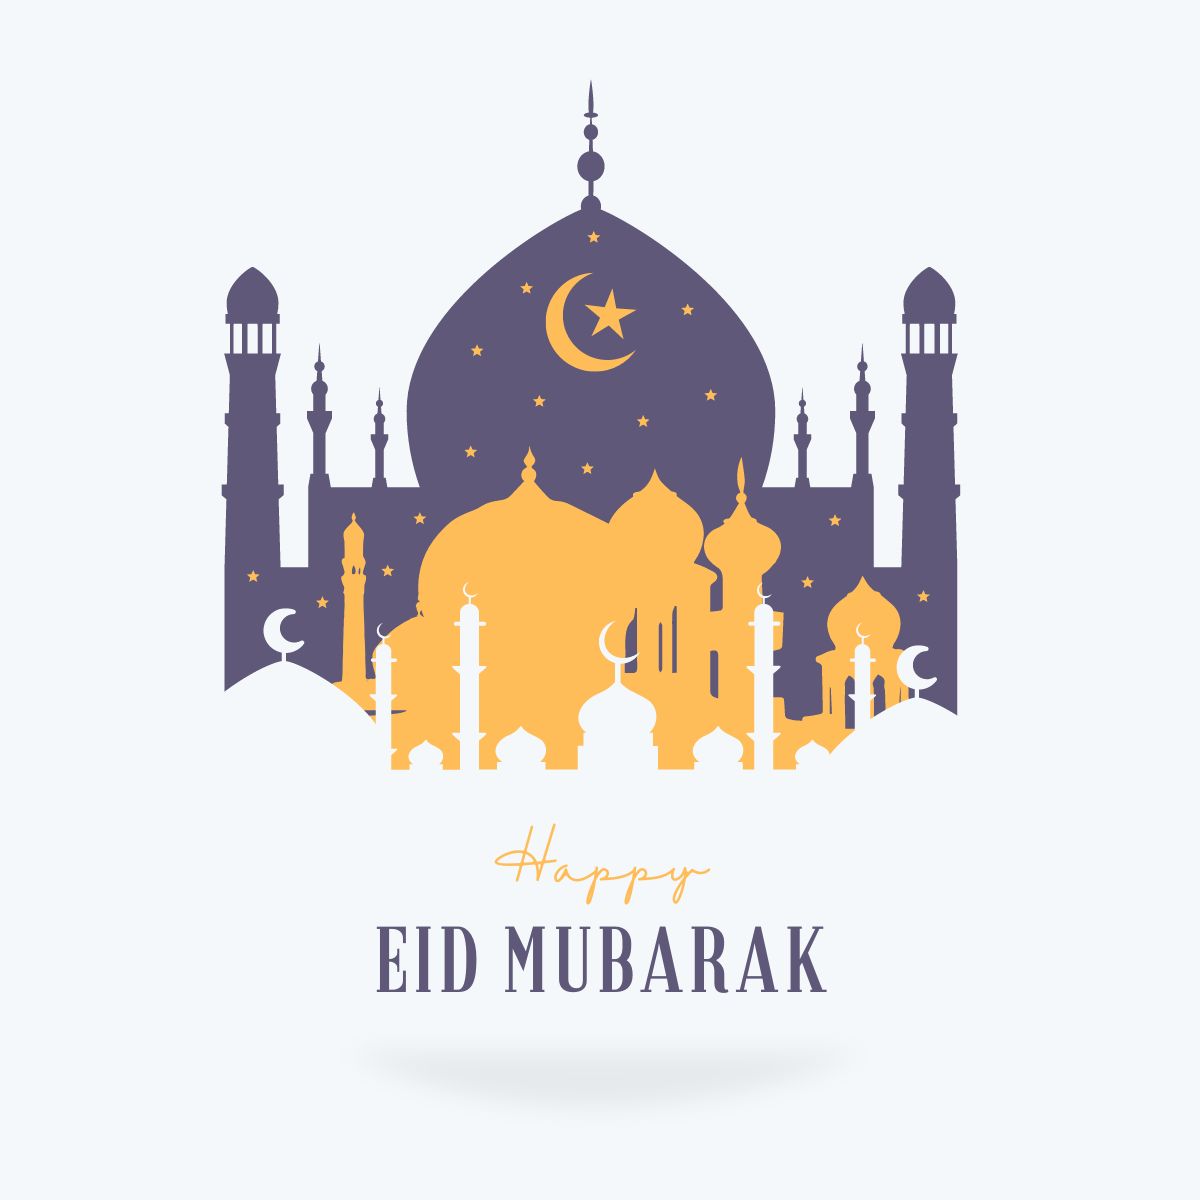 Eid Mubarak to all who celebrate! 🌙🕌💫 Sending warm wishes from our CDM families to yours.